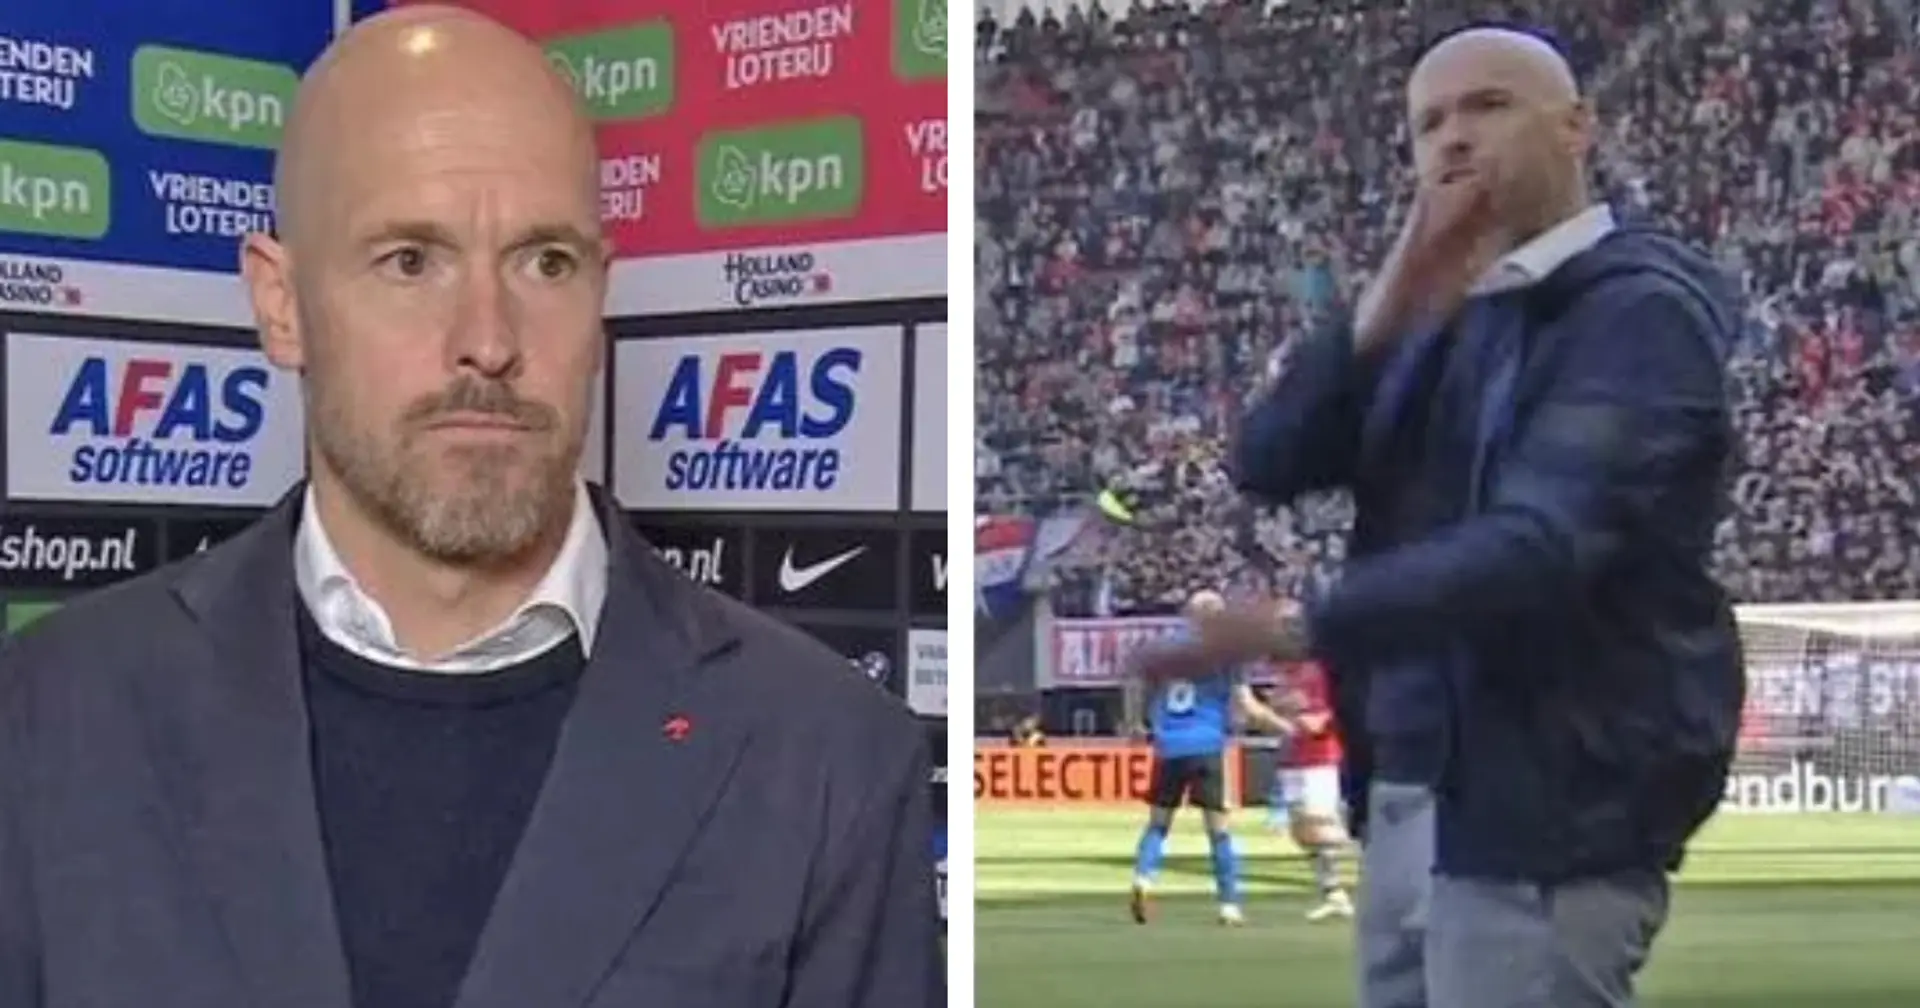 Erik ten Hag loses his cool at referee during Ajax draw as title race heats up